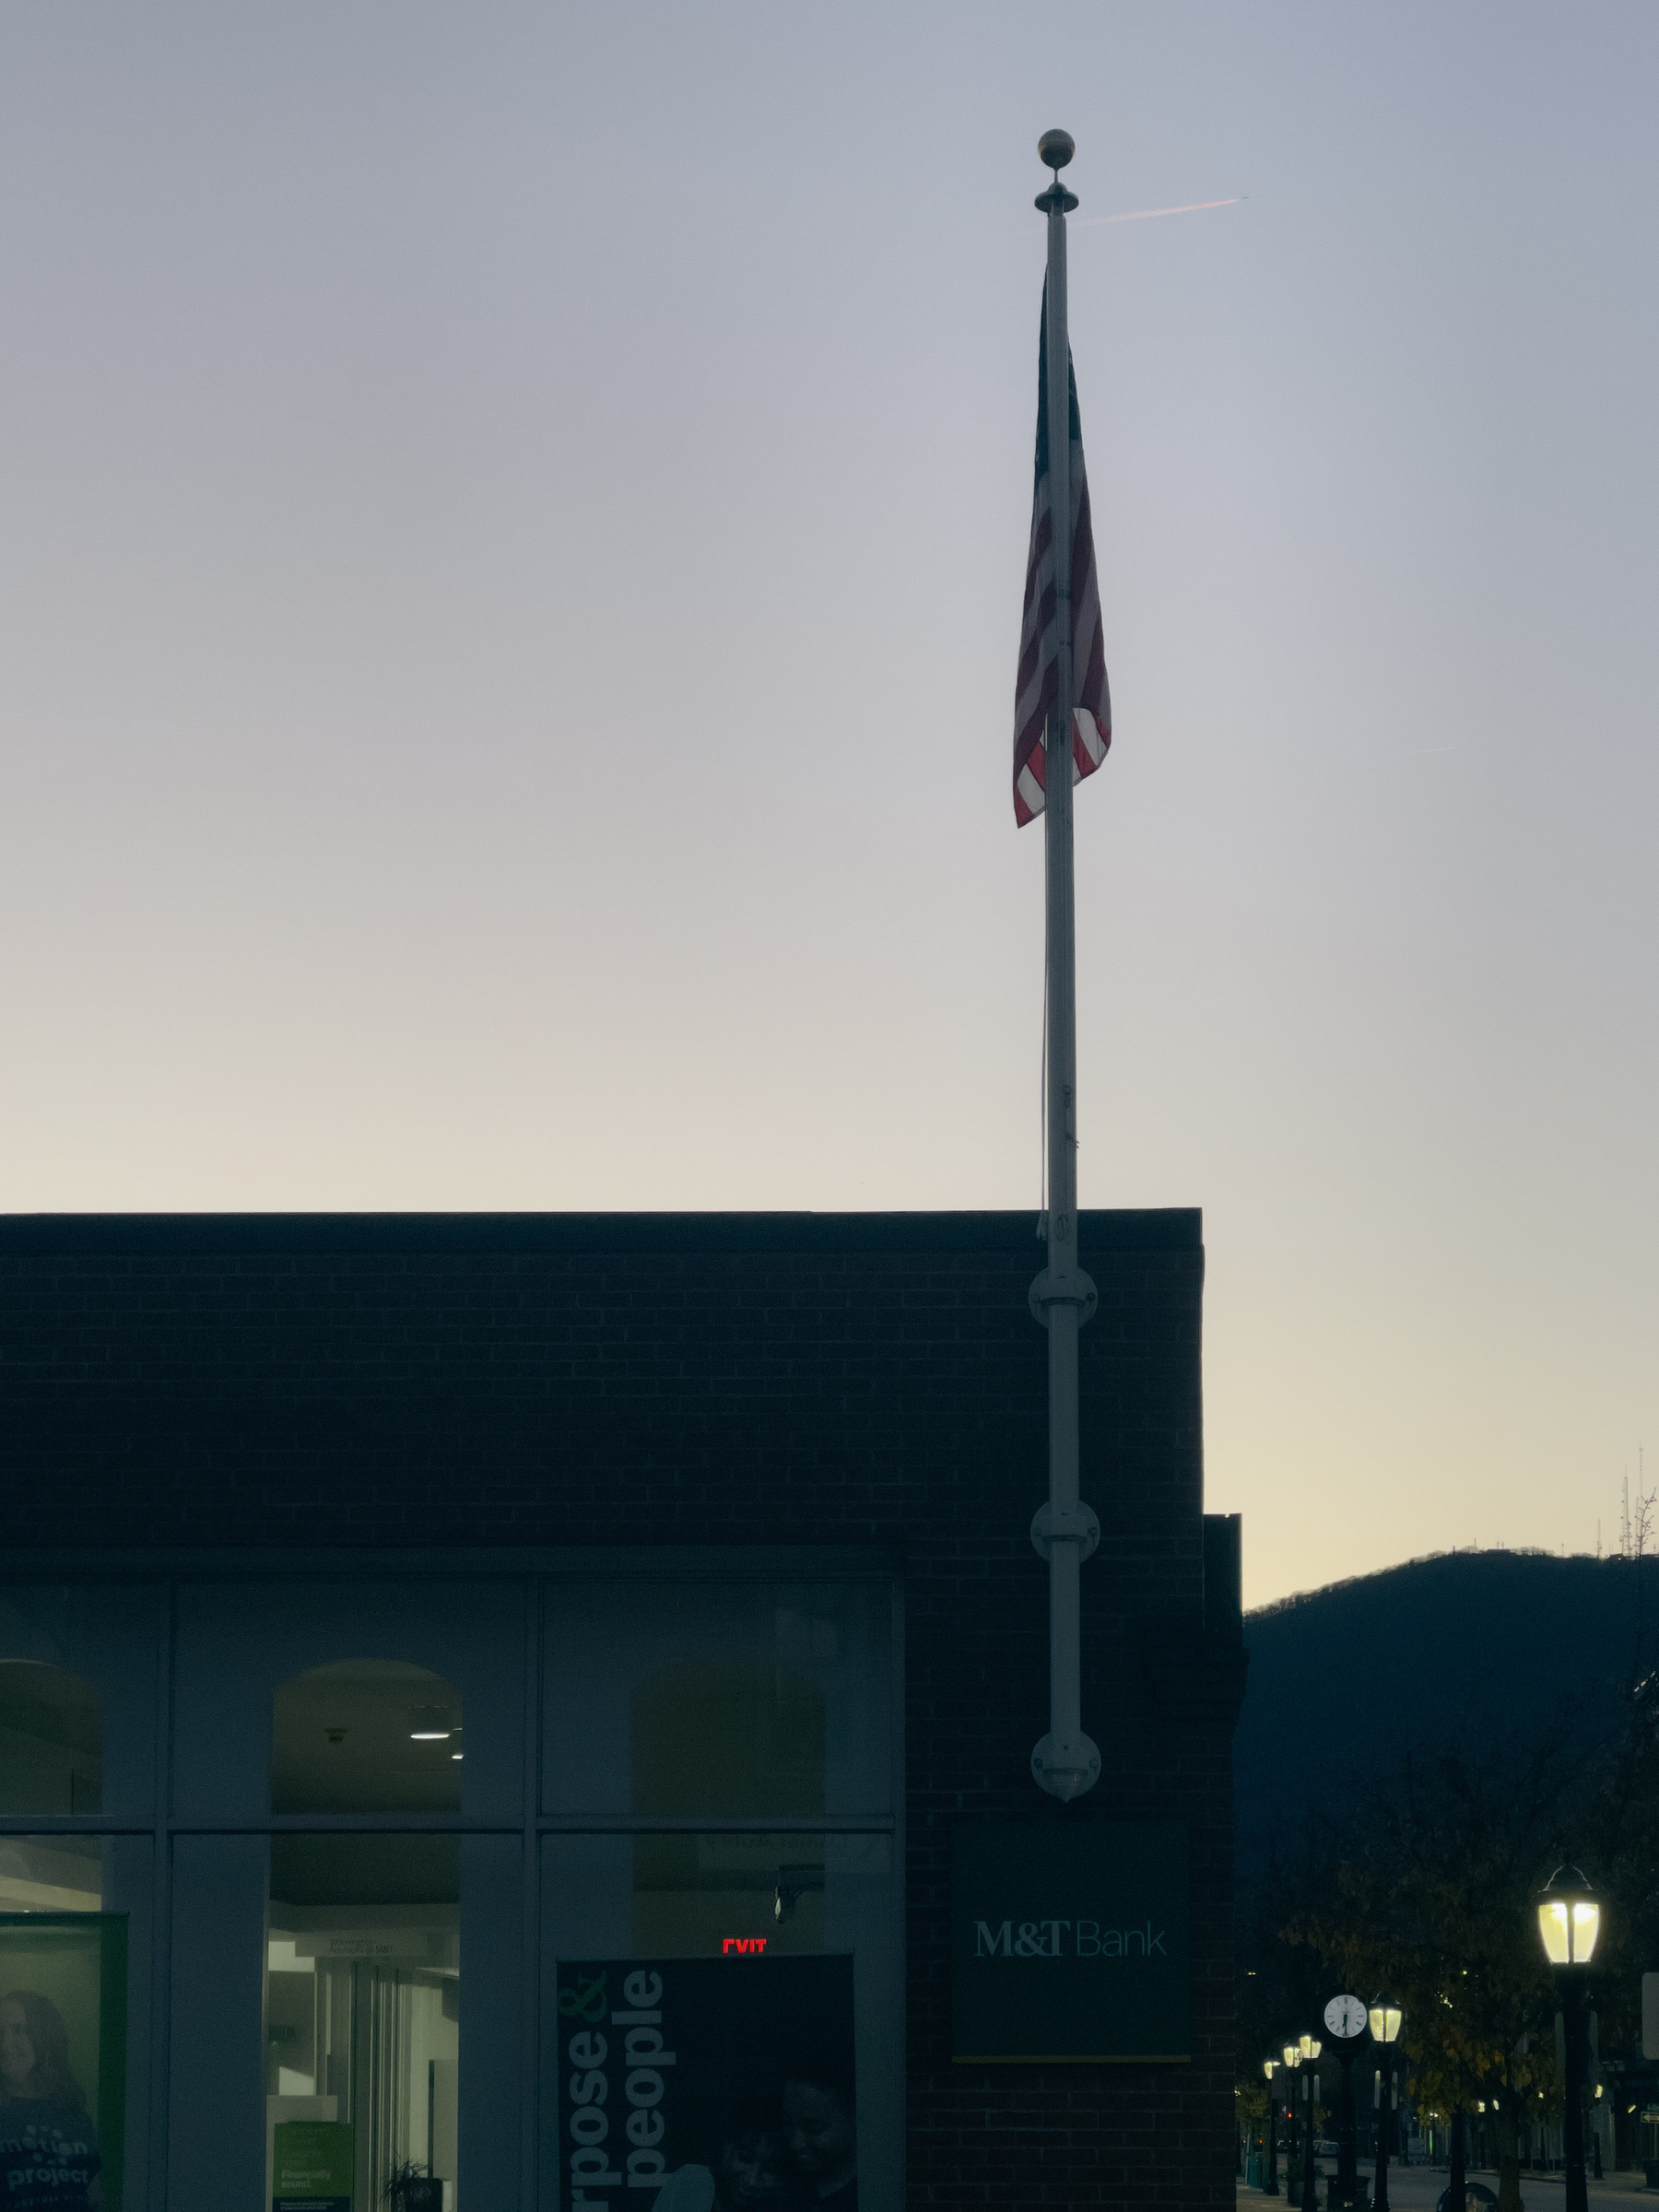 Silhouetted flag pole with American flag mounted on a building also in silhouette and silhouetted mountains in the distance. Dawn sky.